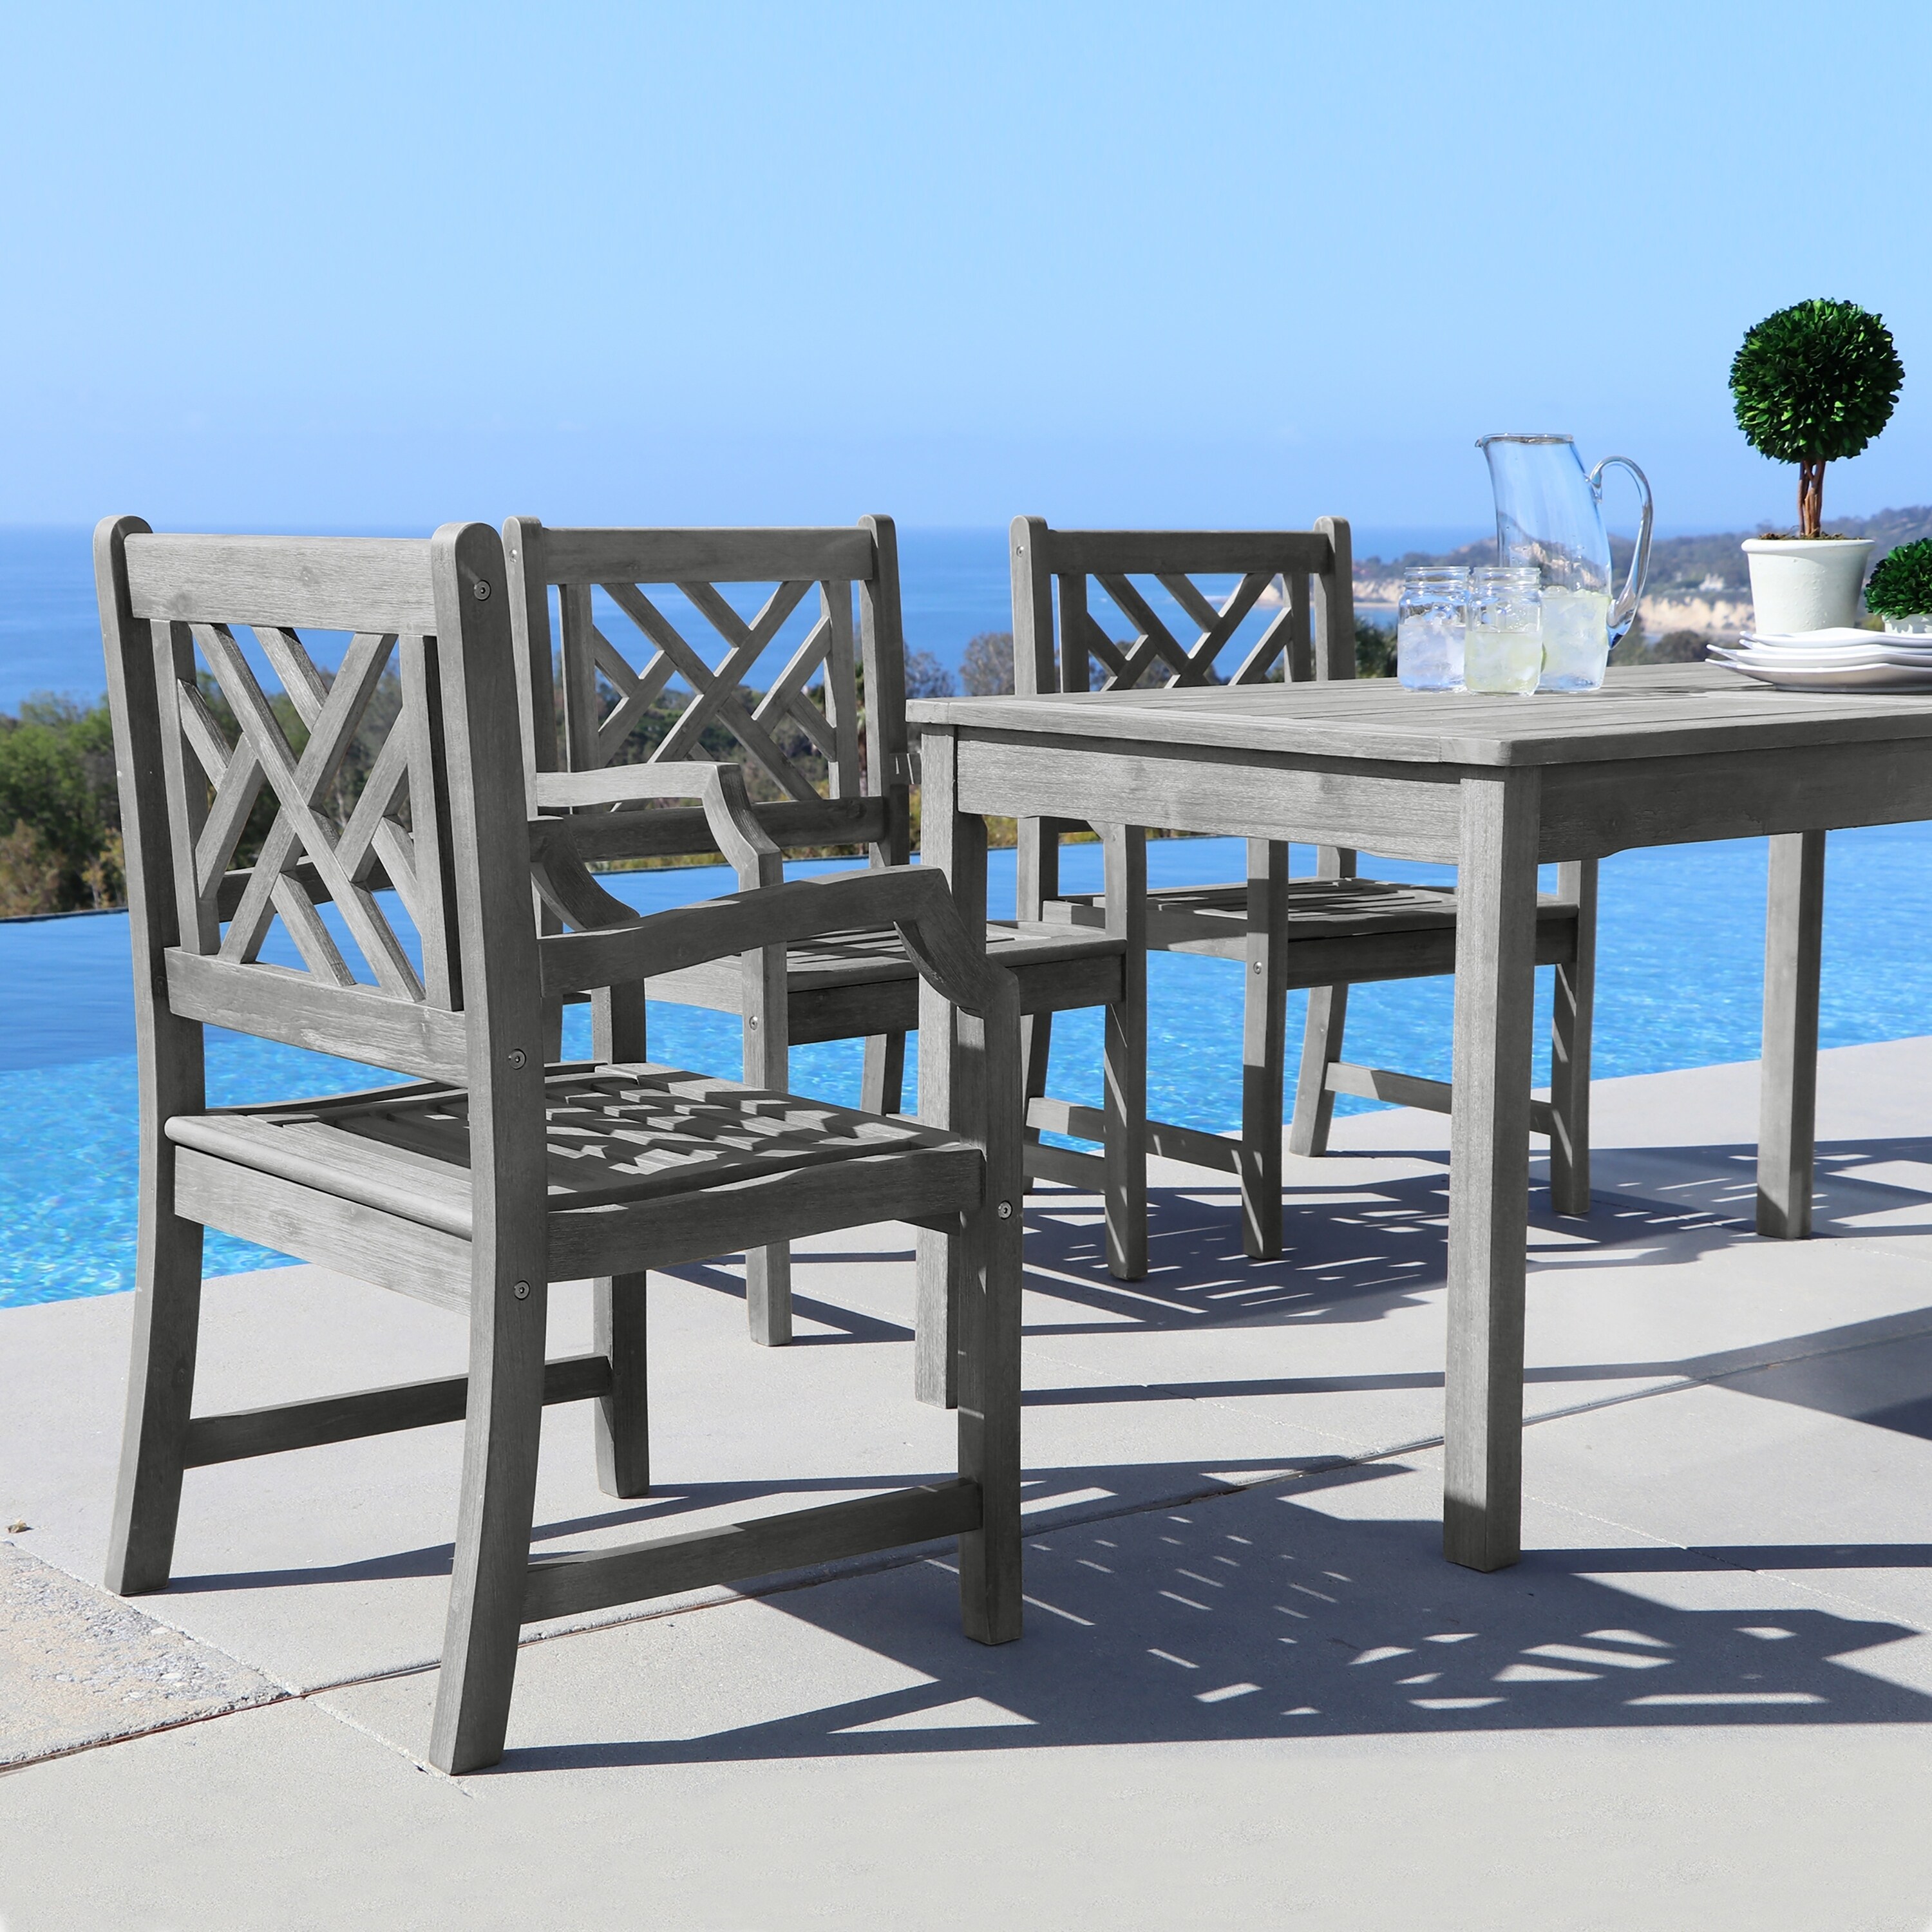 https://ak1.ostkcdn.com/images/products/12090015/Renaissance-Eco-friendly-6-piece-Outdoor-White-Hardwood-Dining-Set-with-Rectangular-Table-4-foot-Bench-and-Arm-Chairs-9e23ba49-d302-4963-aa01-96088d20212e.jpg